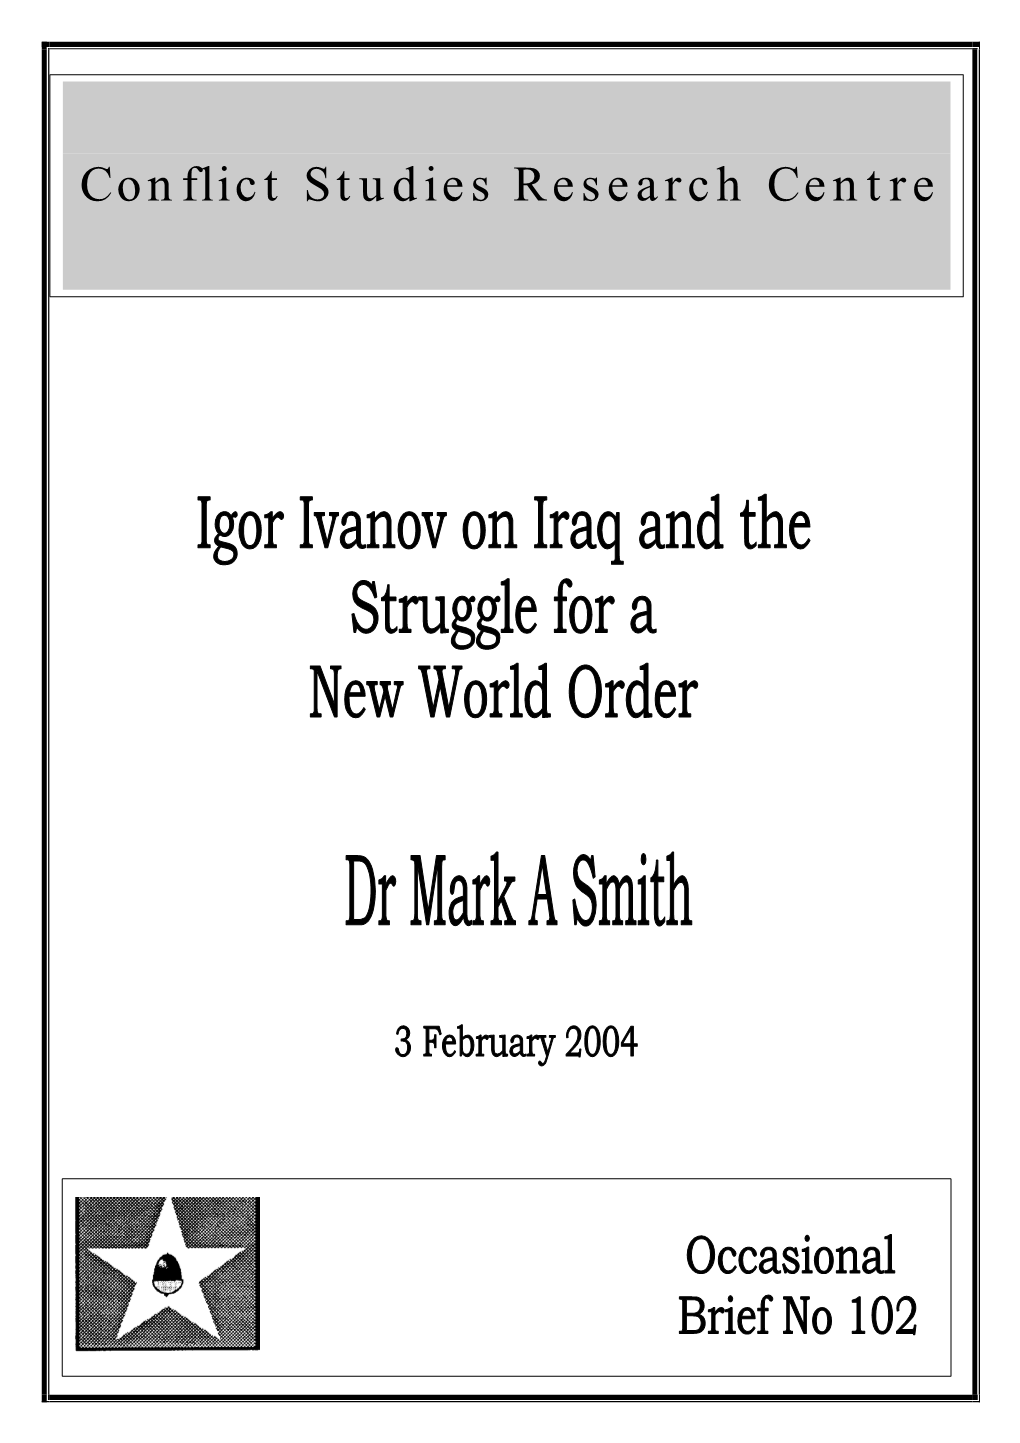 Igor Ivanov on Iraq and the Struggle for a New World Order